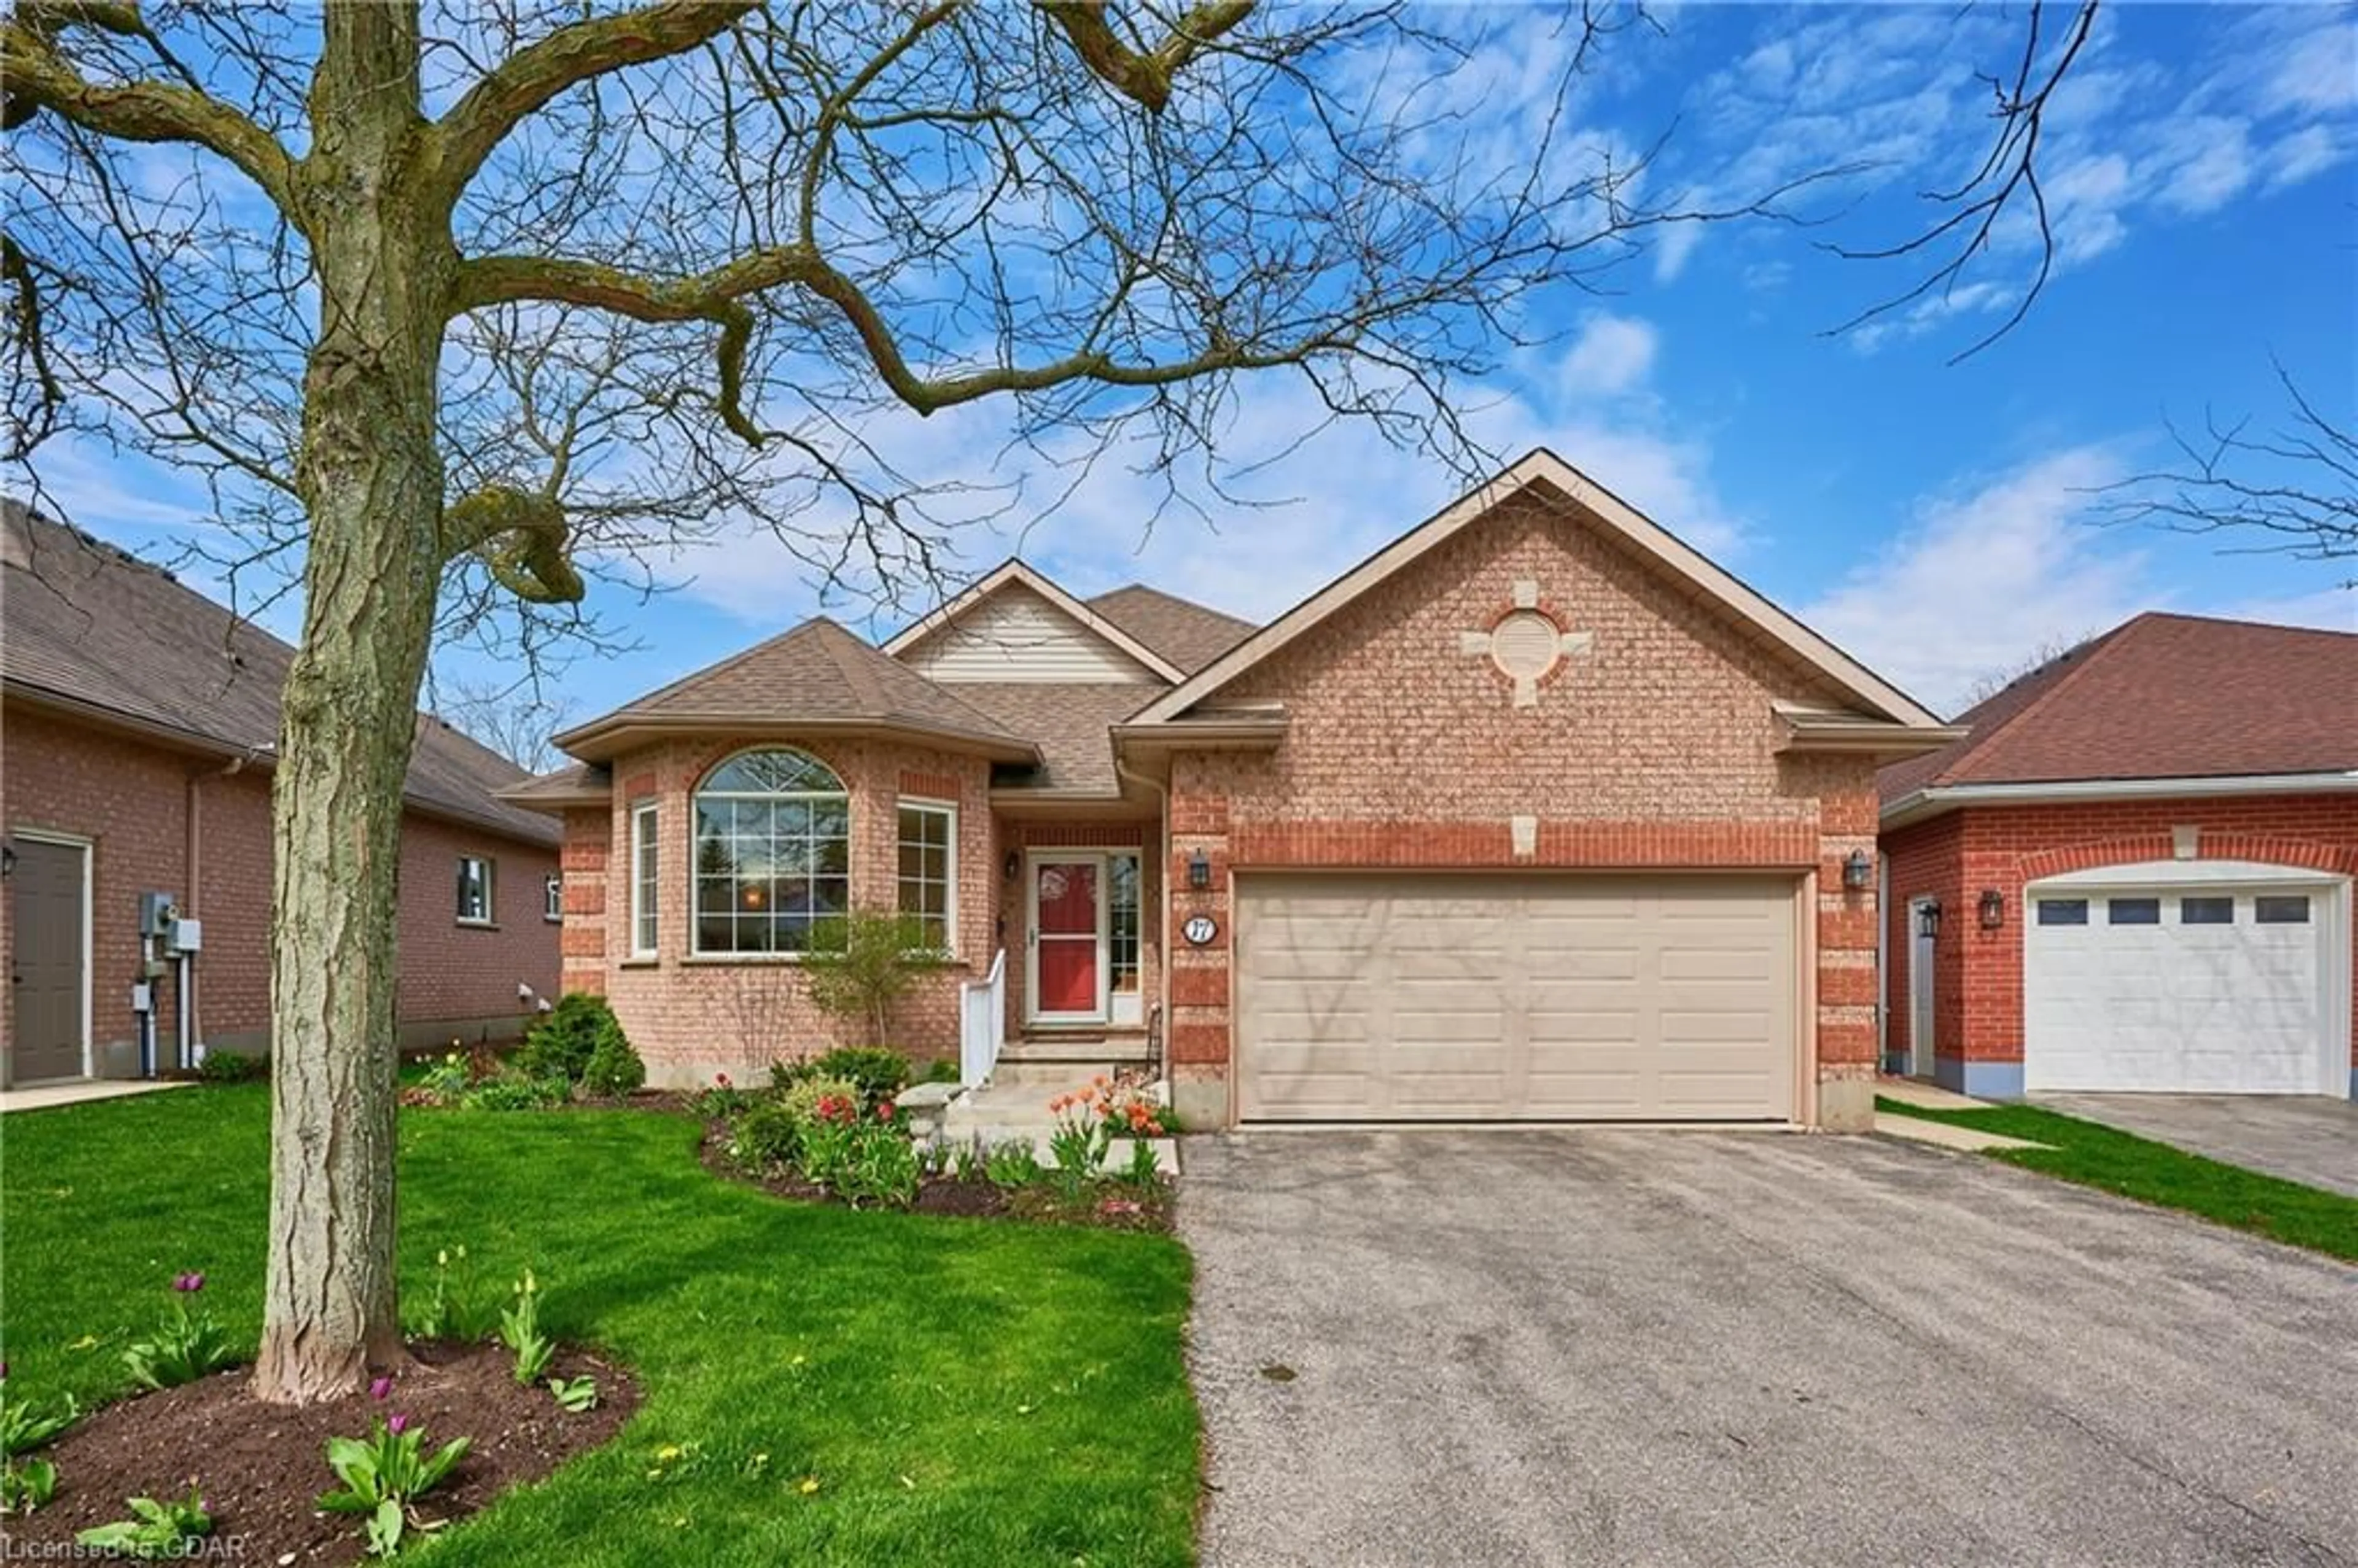 Home with brick exterior material for 17 Arbordale Walk, Guelph Ontario N1G 4X7